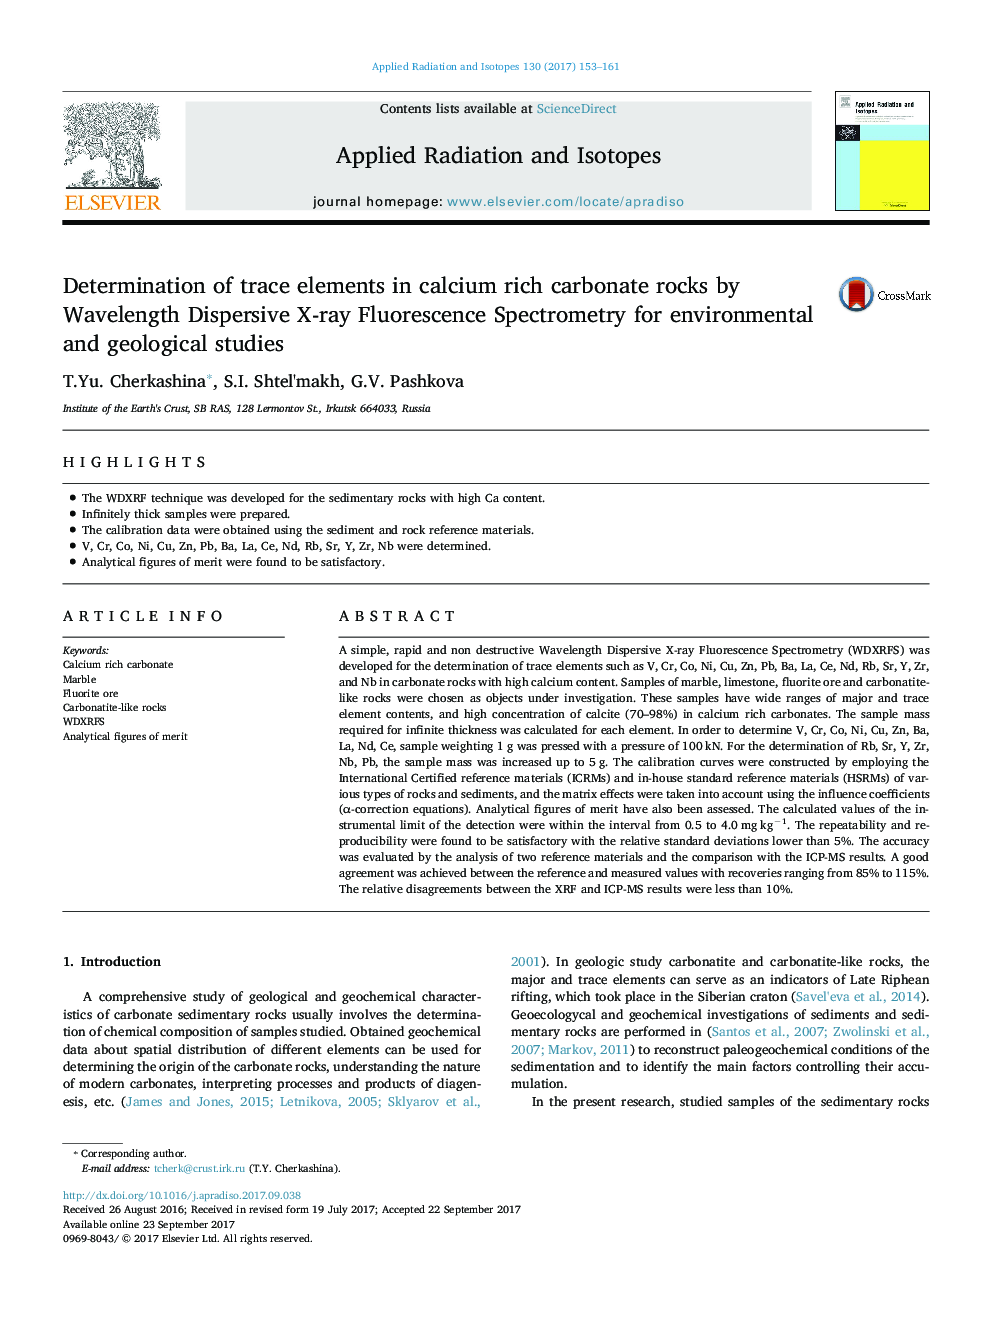 Determination of trace elements in calcium rich carbonate rocks by Wavelength Dispersive X-ray Fluorescence Spectrometry for environmental and geological studies